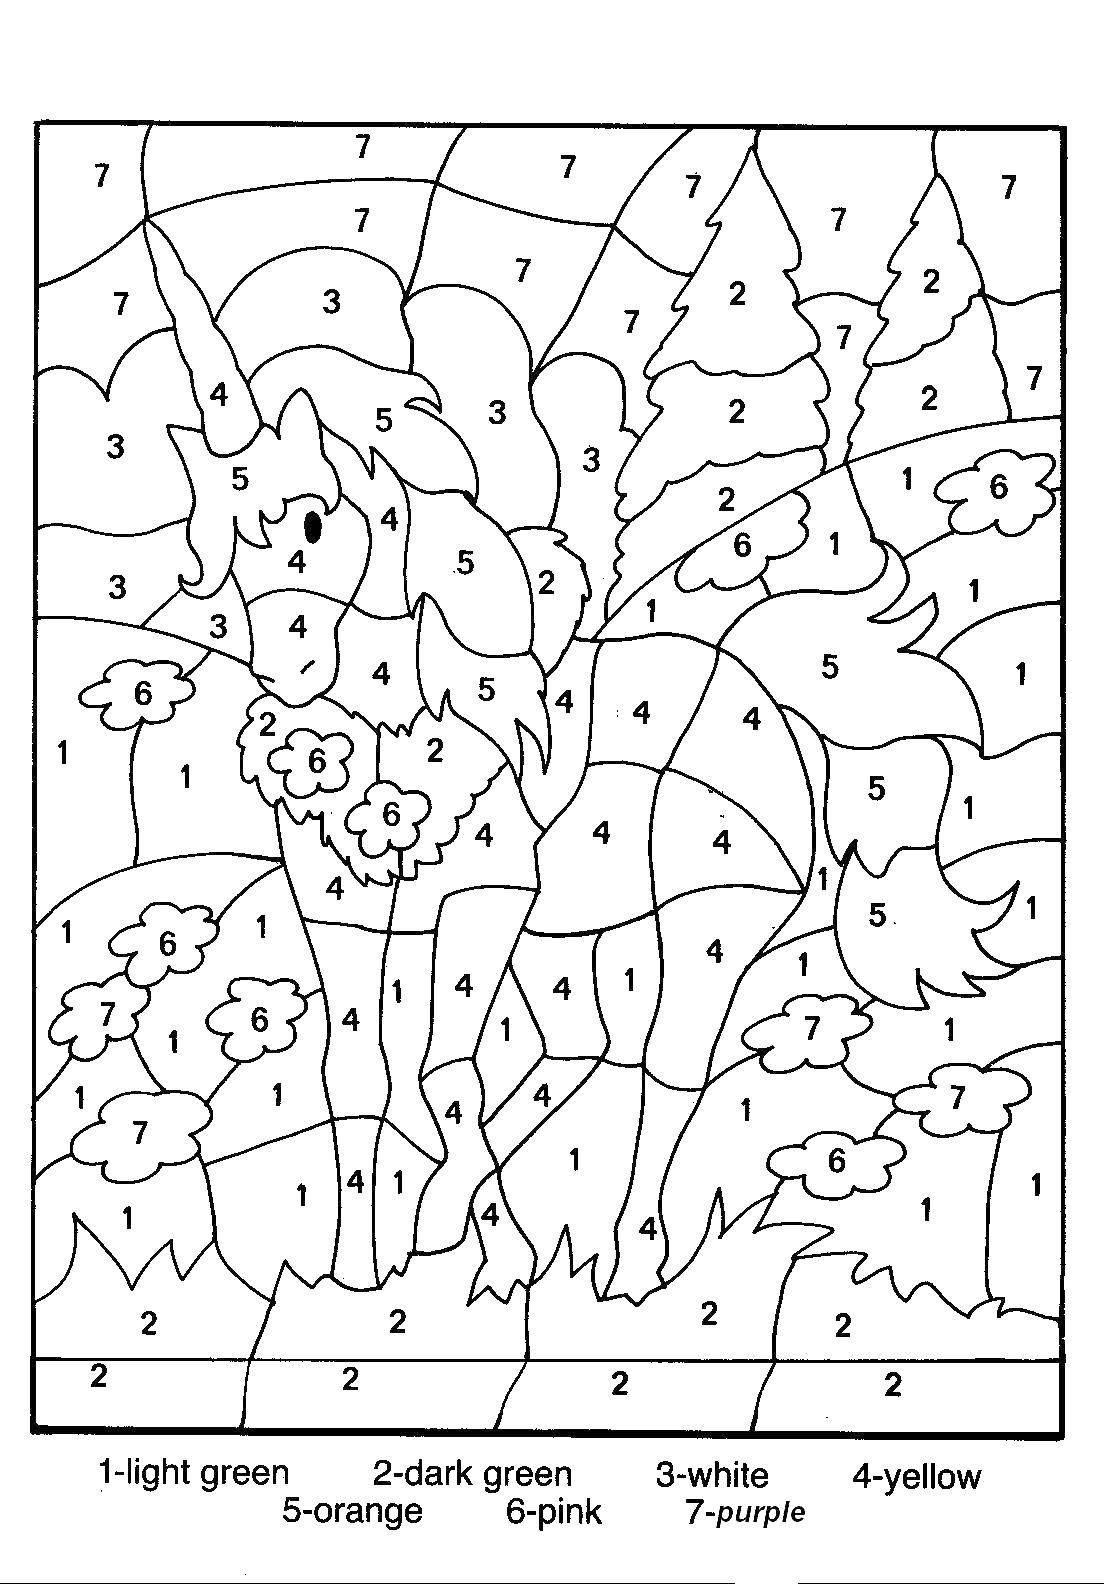 Coloring The unicorn in the meadow. Category That number. Tags:  the unicorn, meadow, flowers, trees.